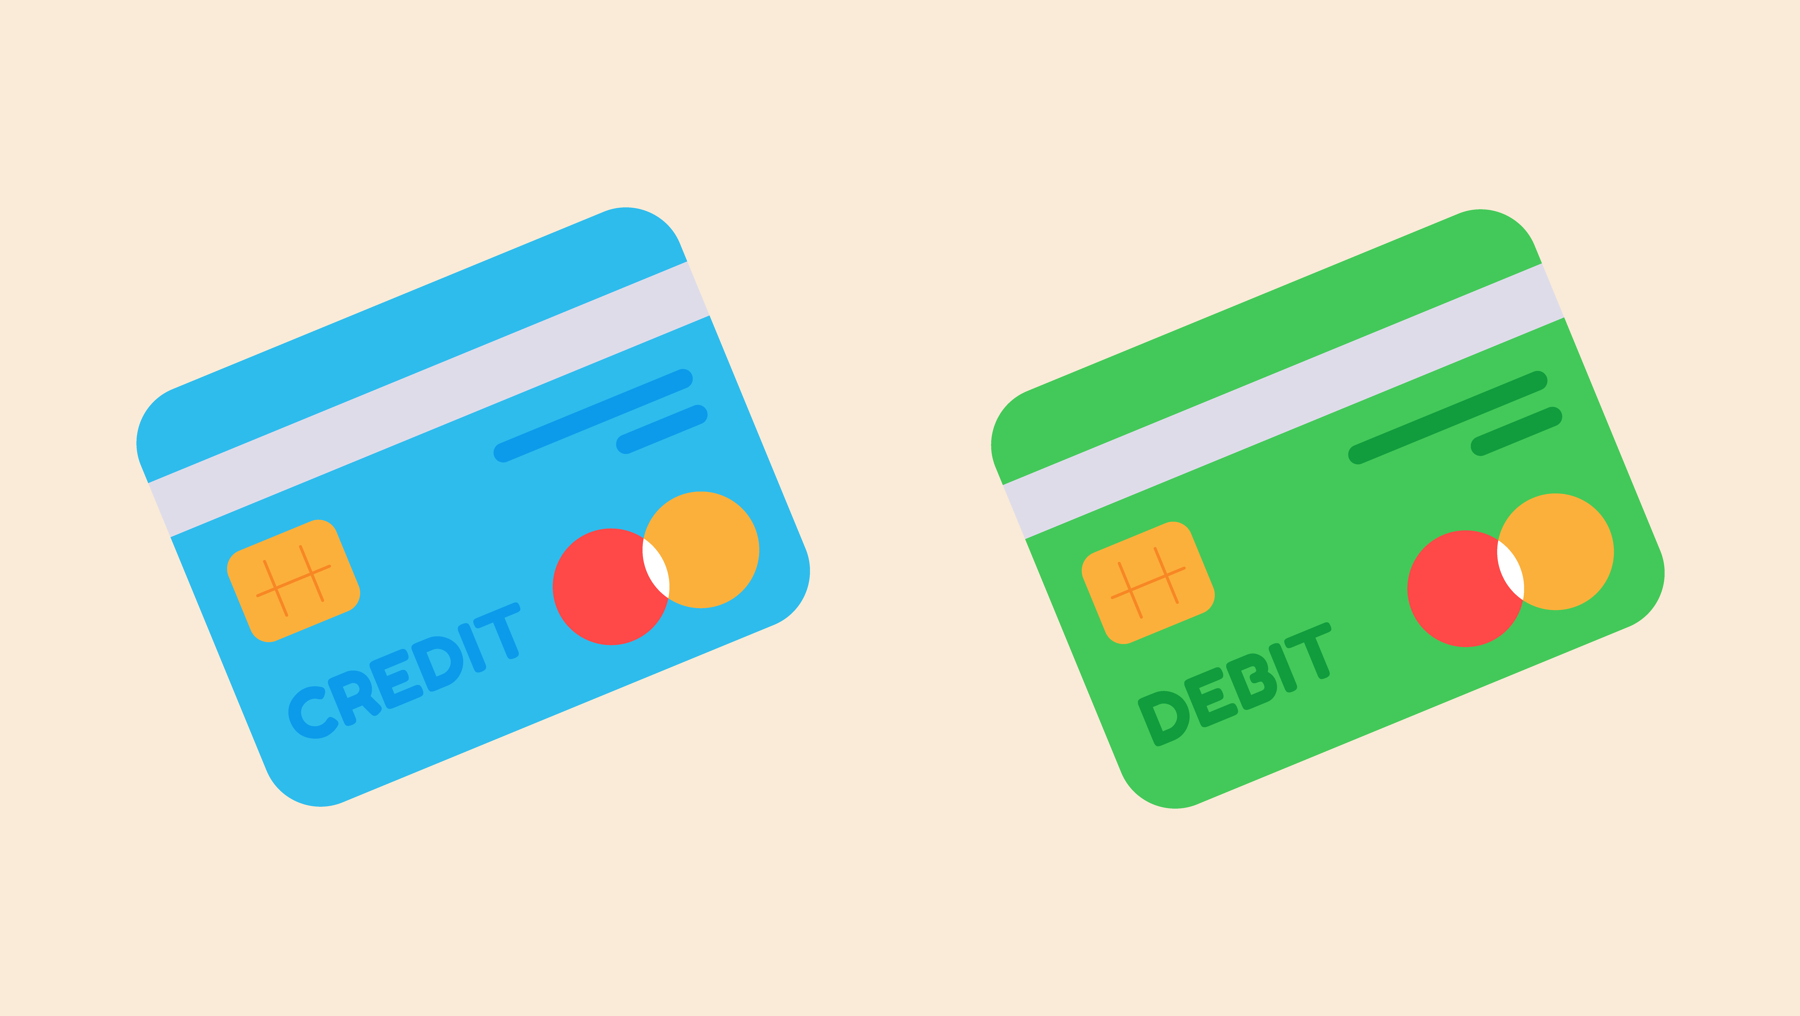 An illustration of a credit and debit card.